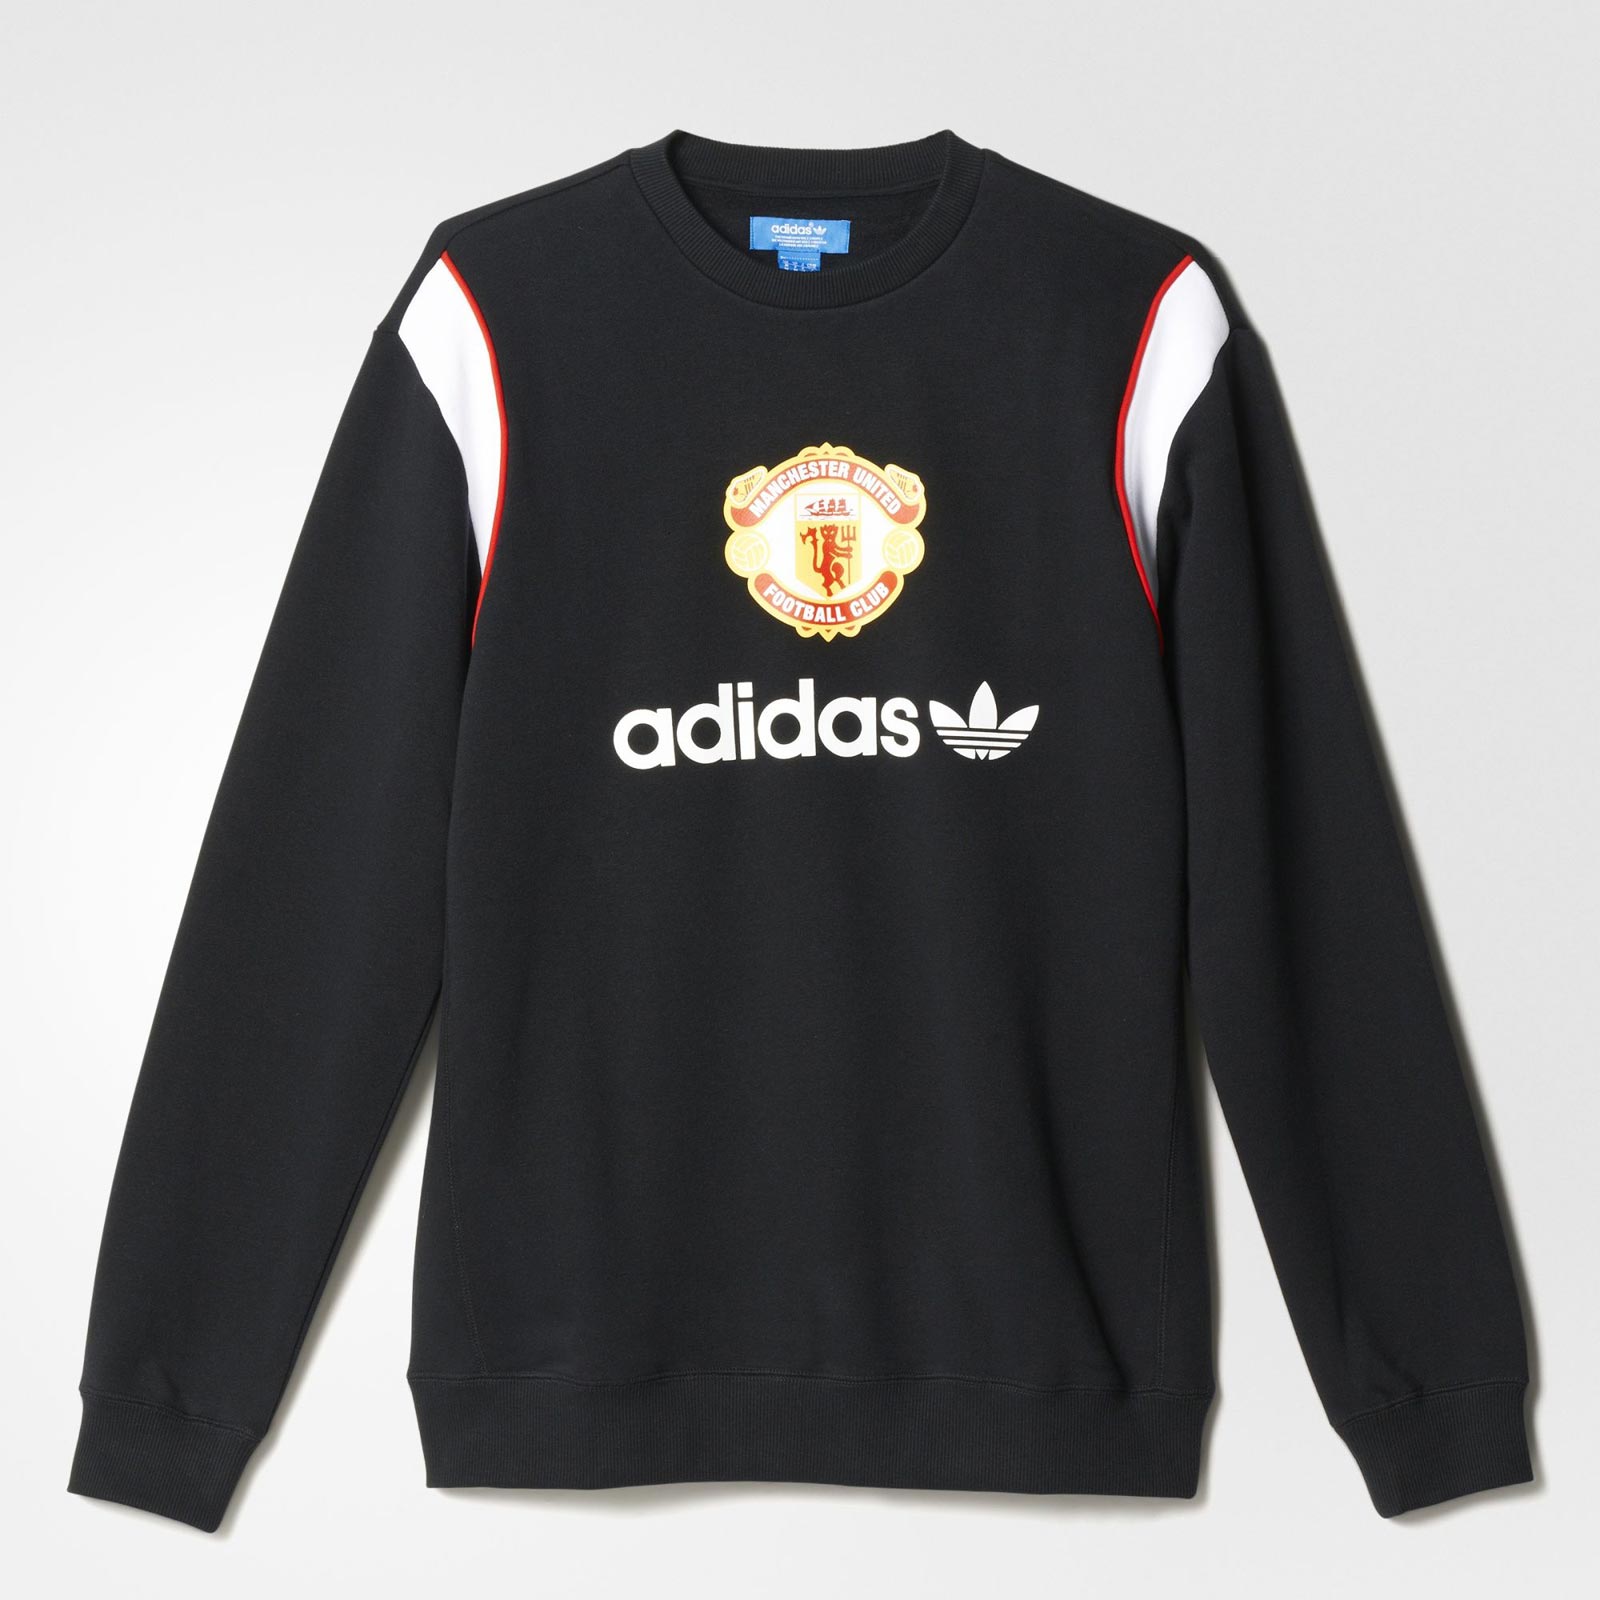 New Adidas Originals x Manchester United Collection Revealed - Footy